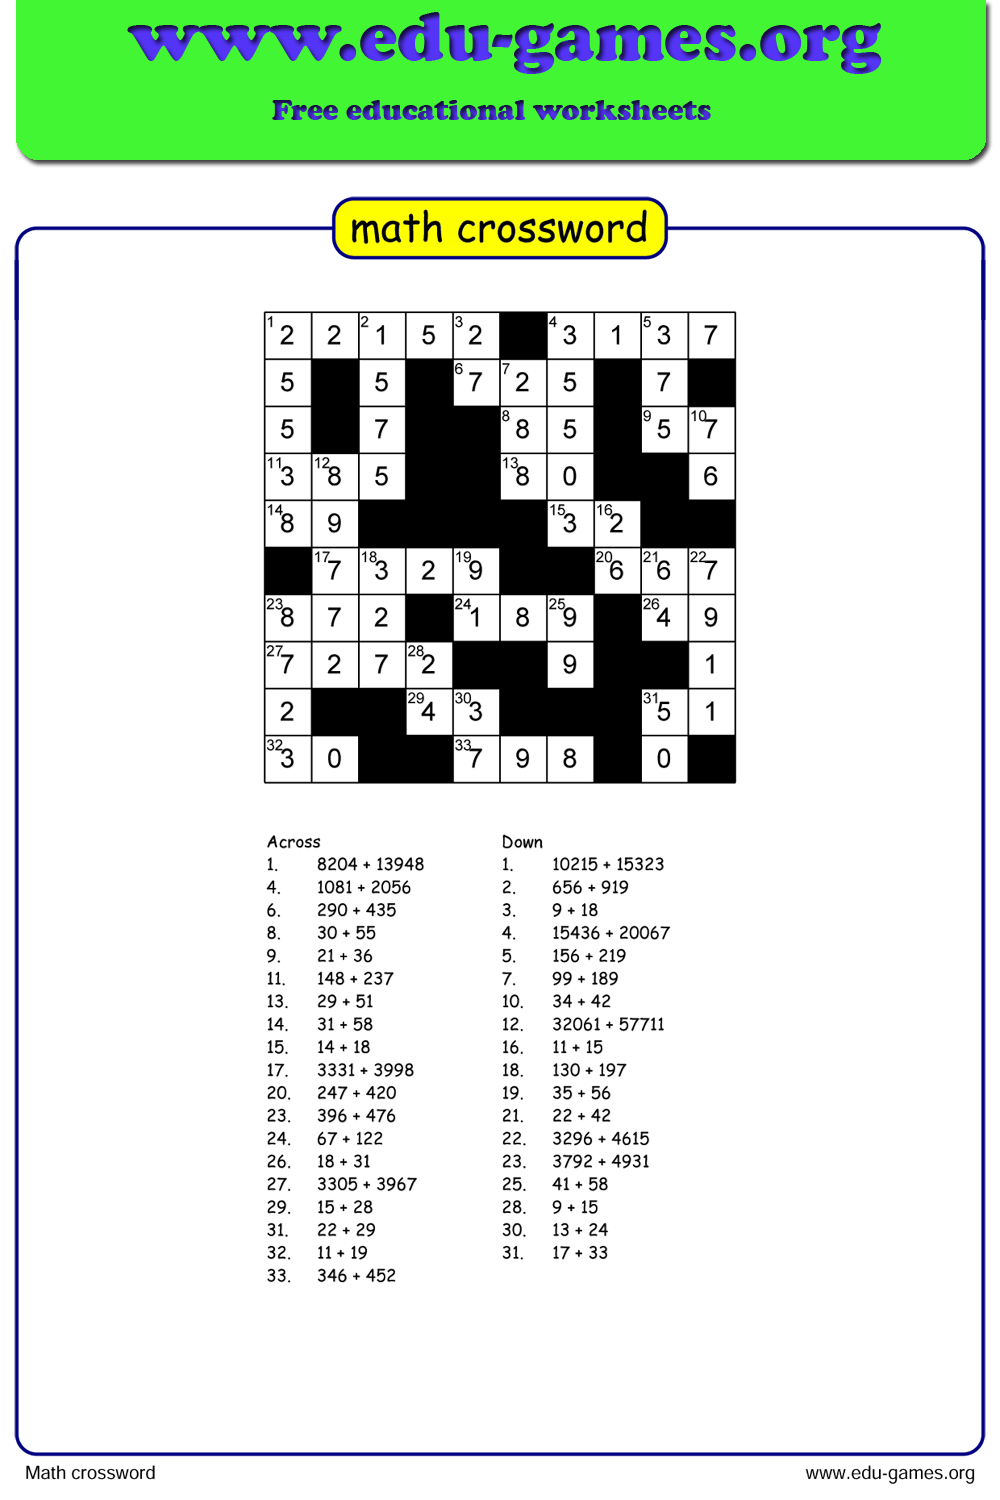 Game Of Thrones Crossword Puzzle Printable